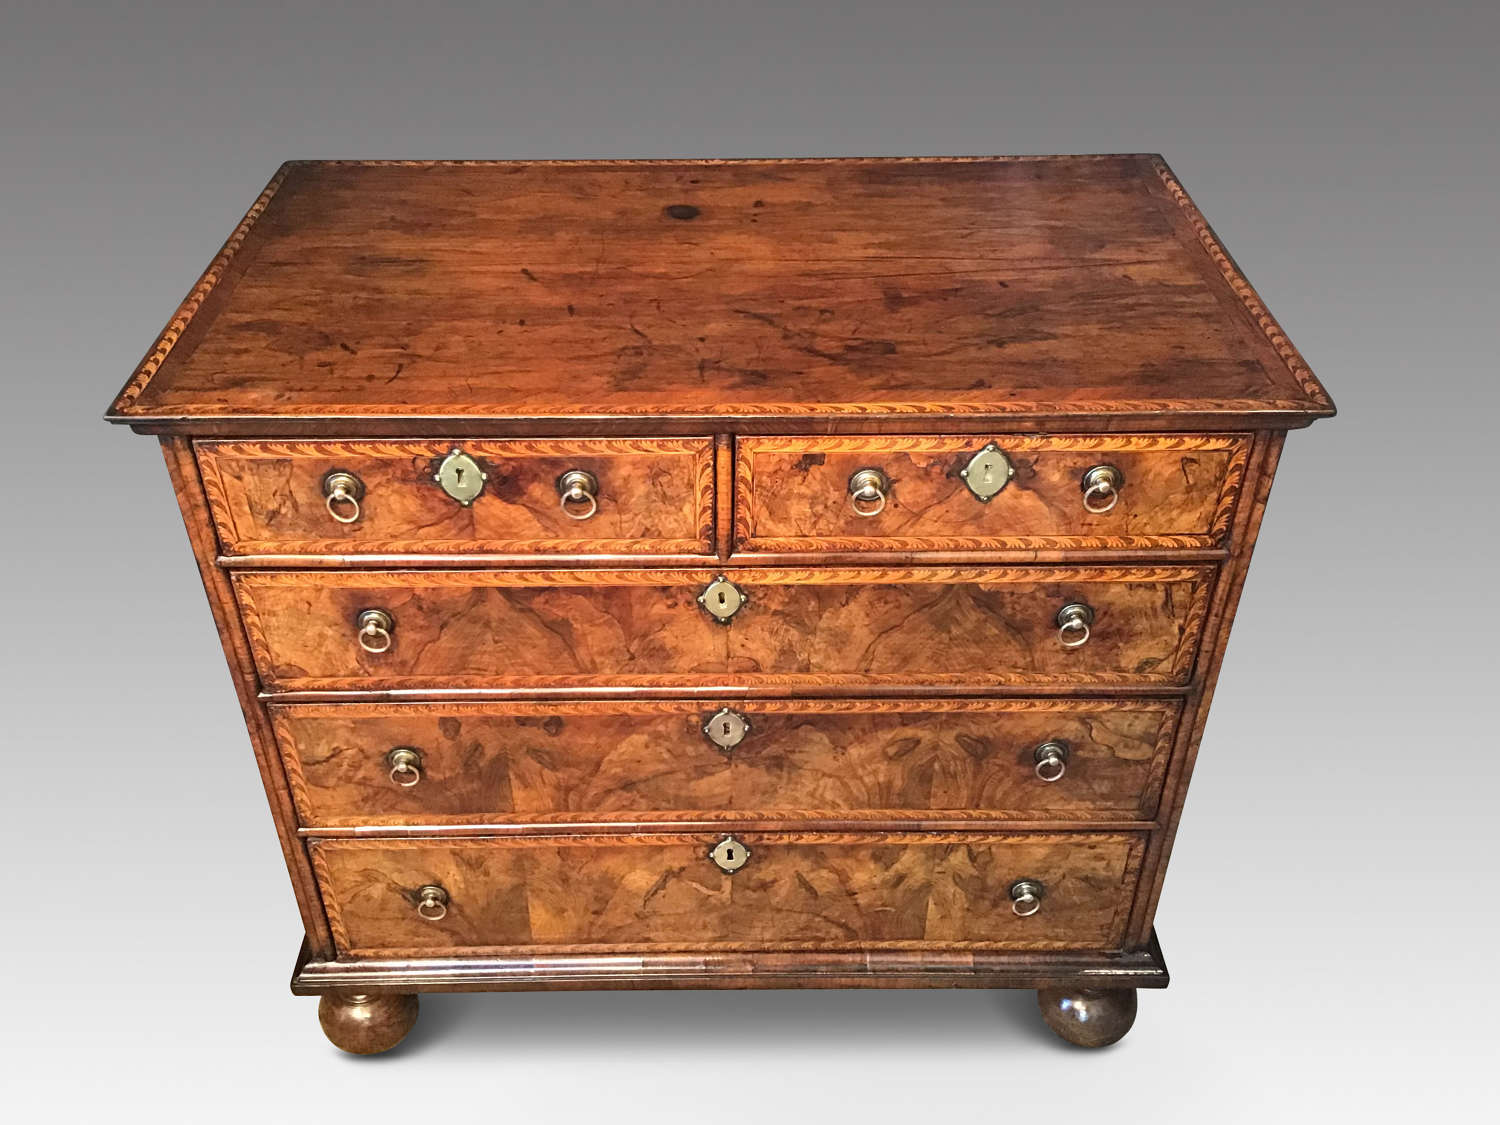 Antique walnut and marquetry chest of drawers